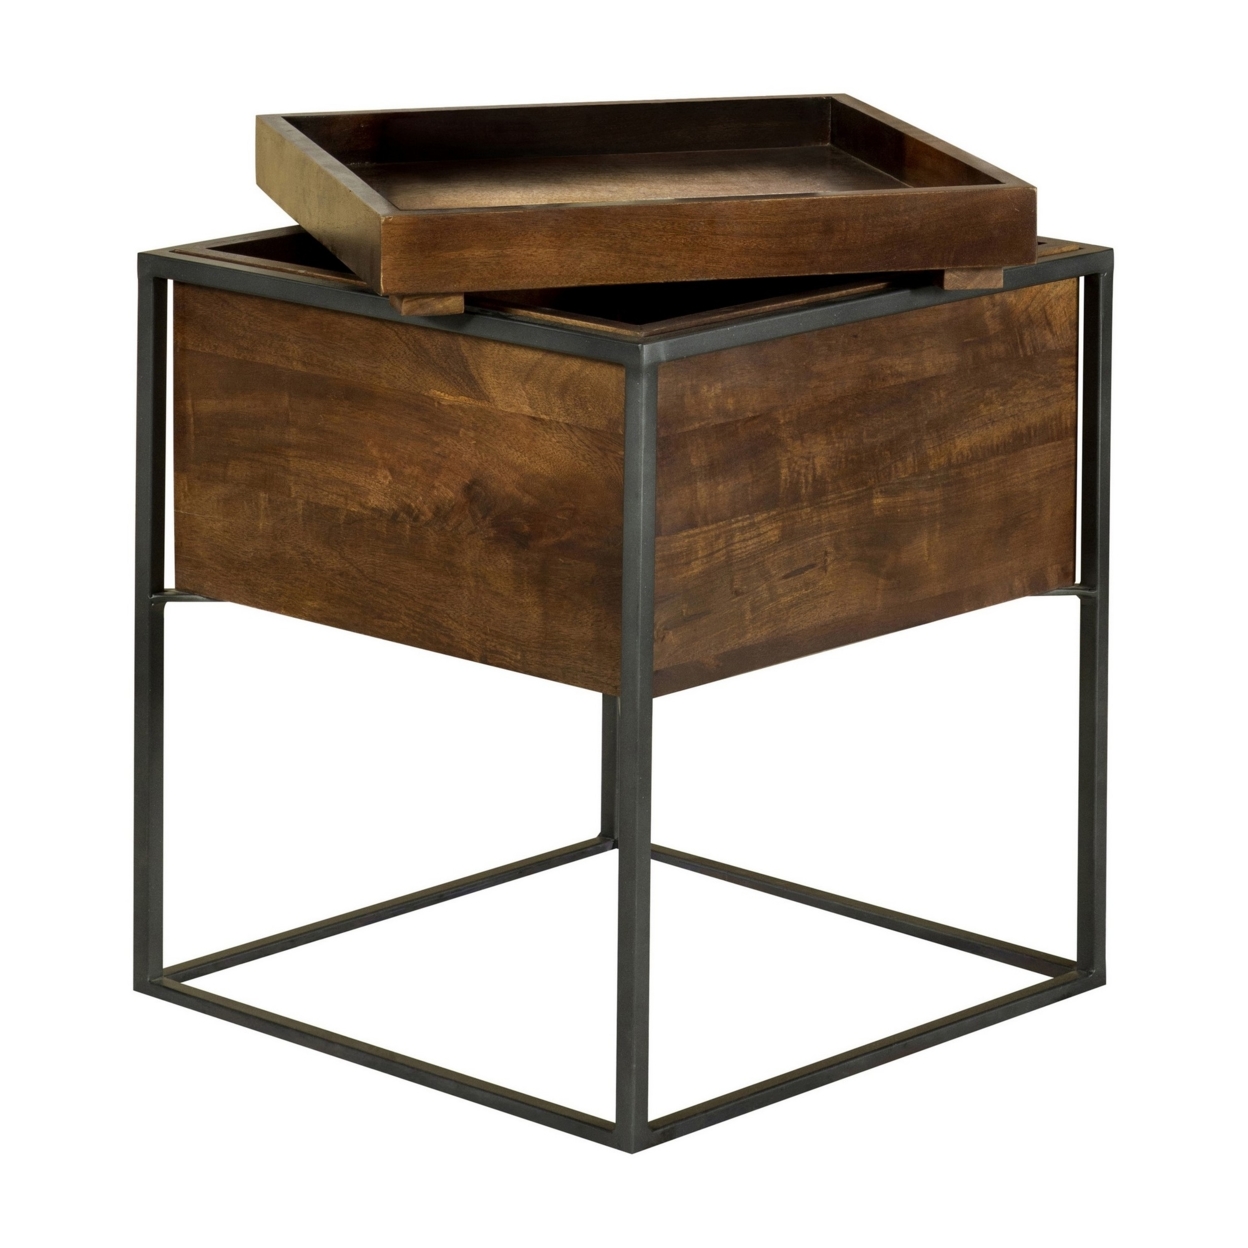 22 Inch Modern Square Accent Table, Removable Tray Top With Storage, Brown- Saltoro Sherpi